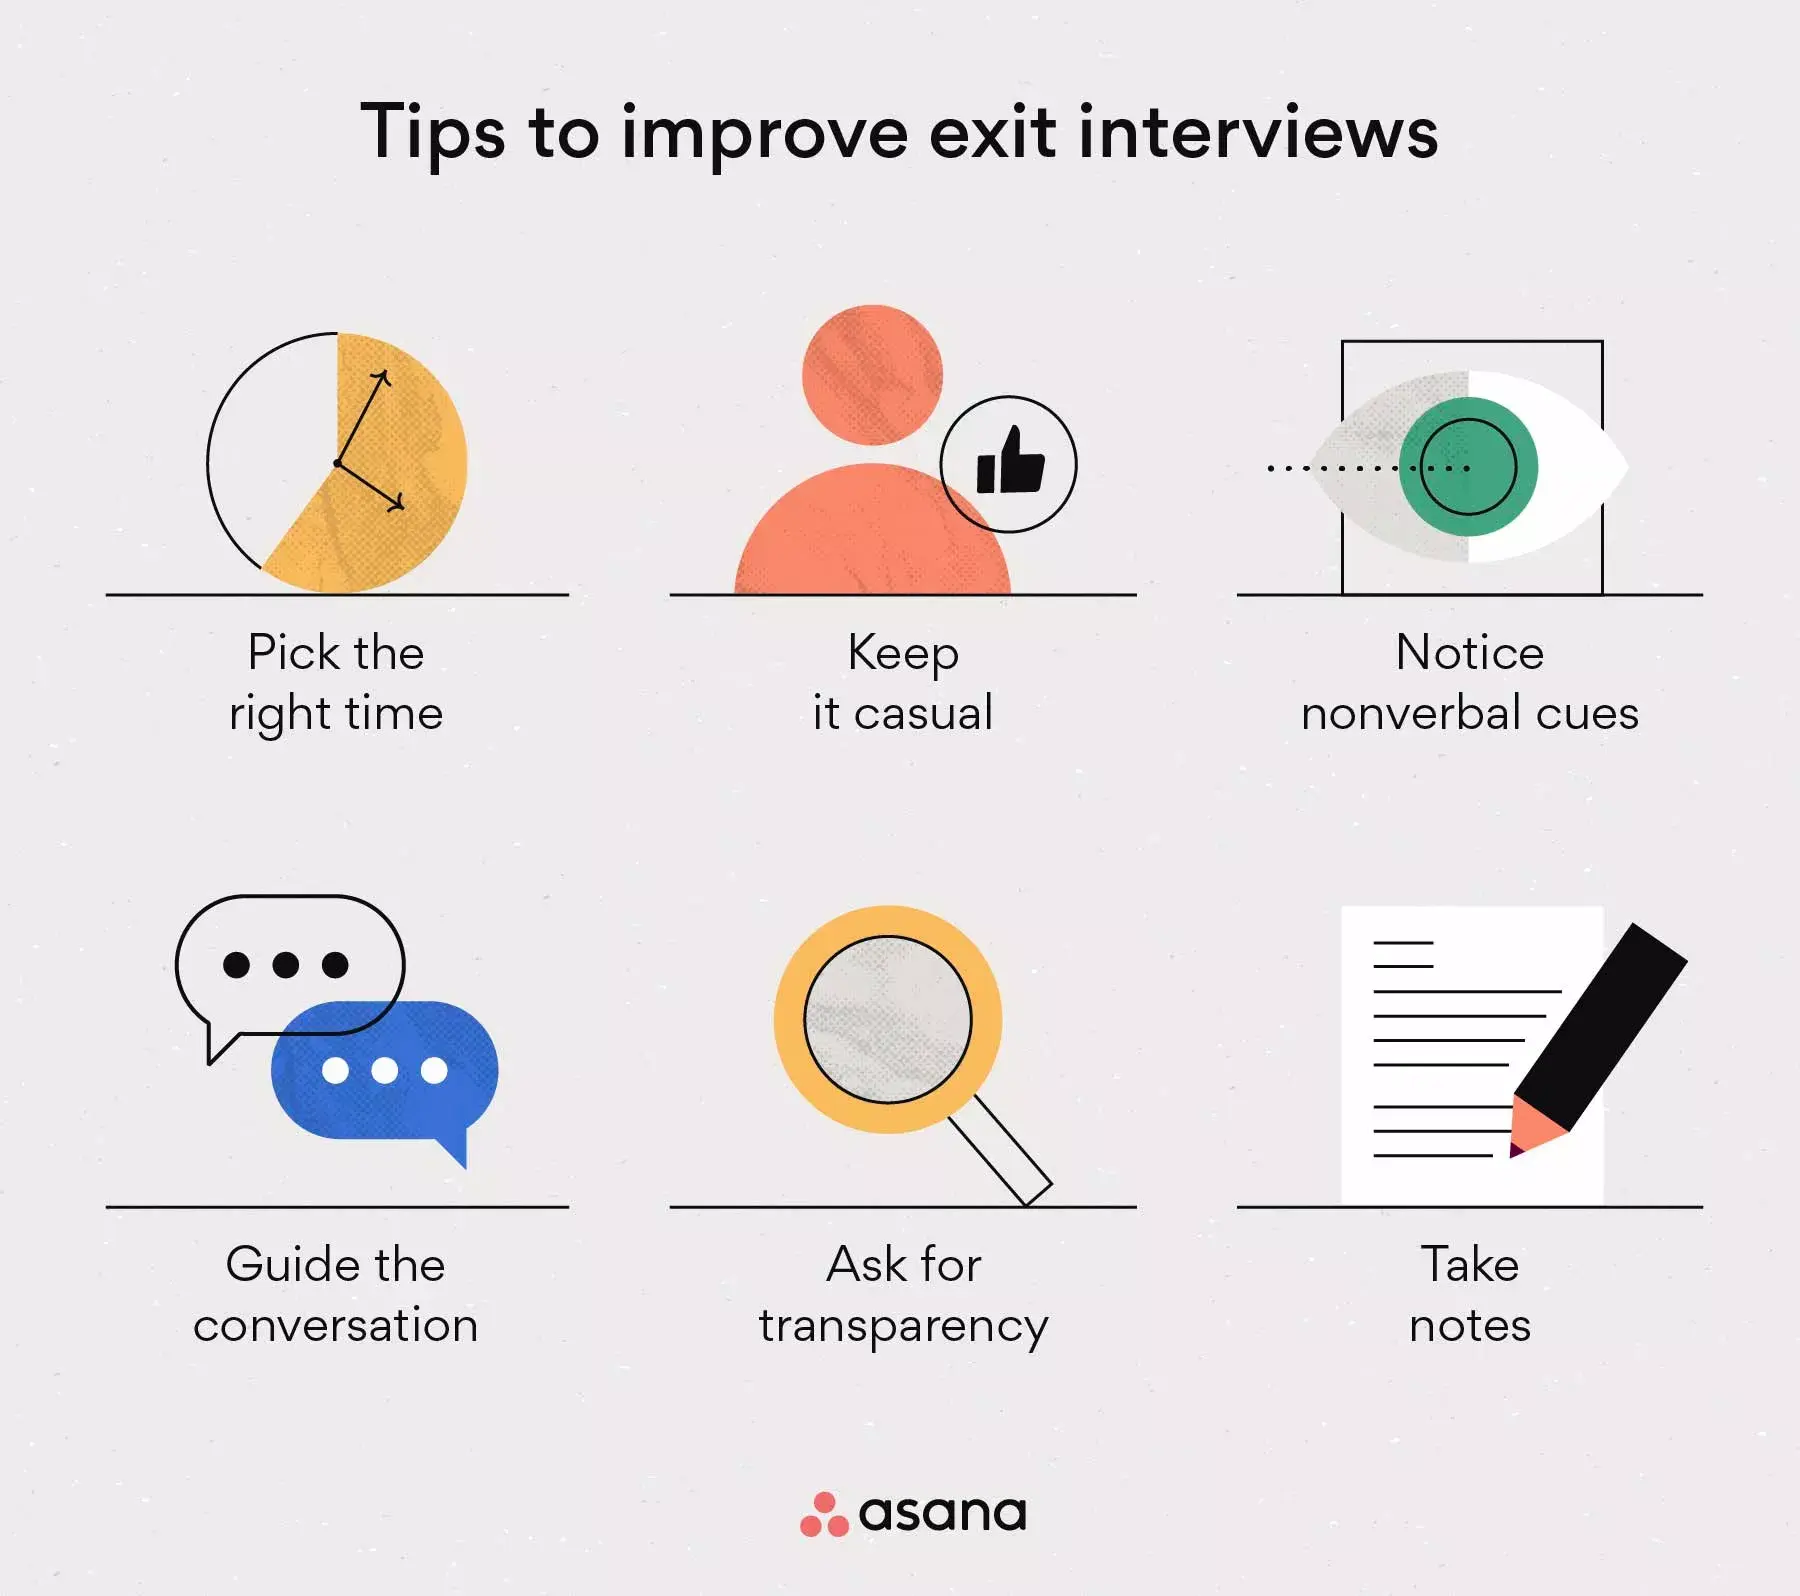 [inline illustration] Tips to improve exit interviews (infographic)